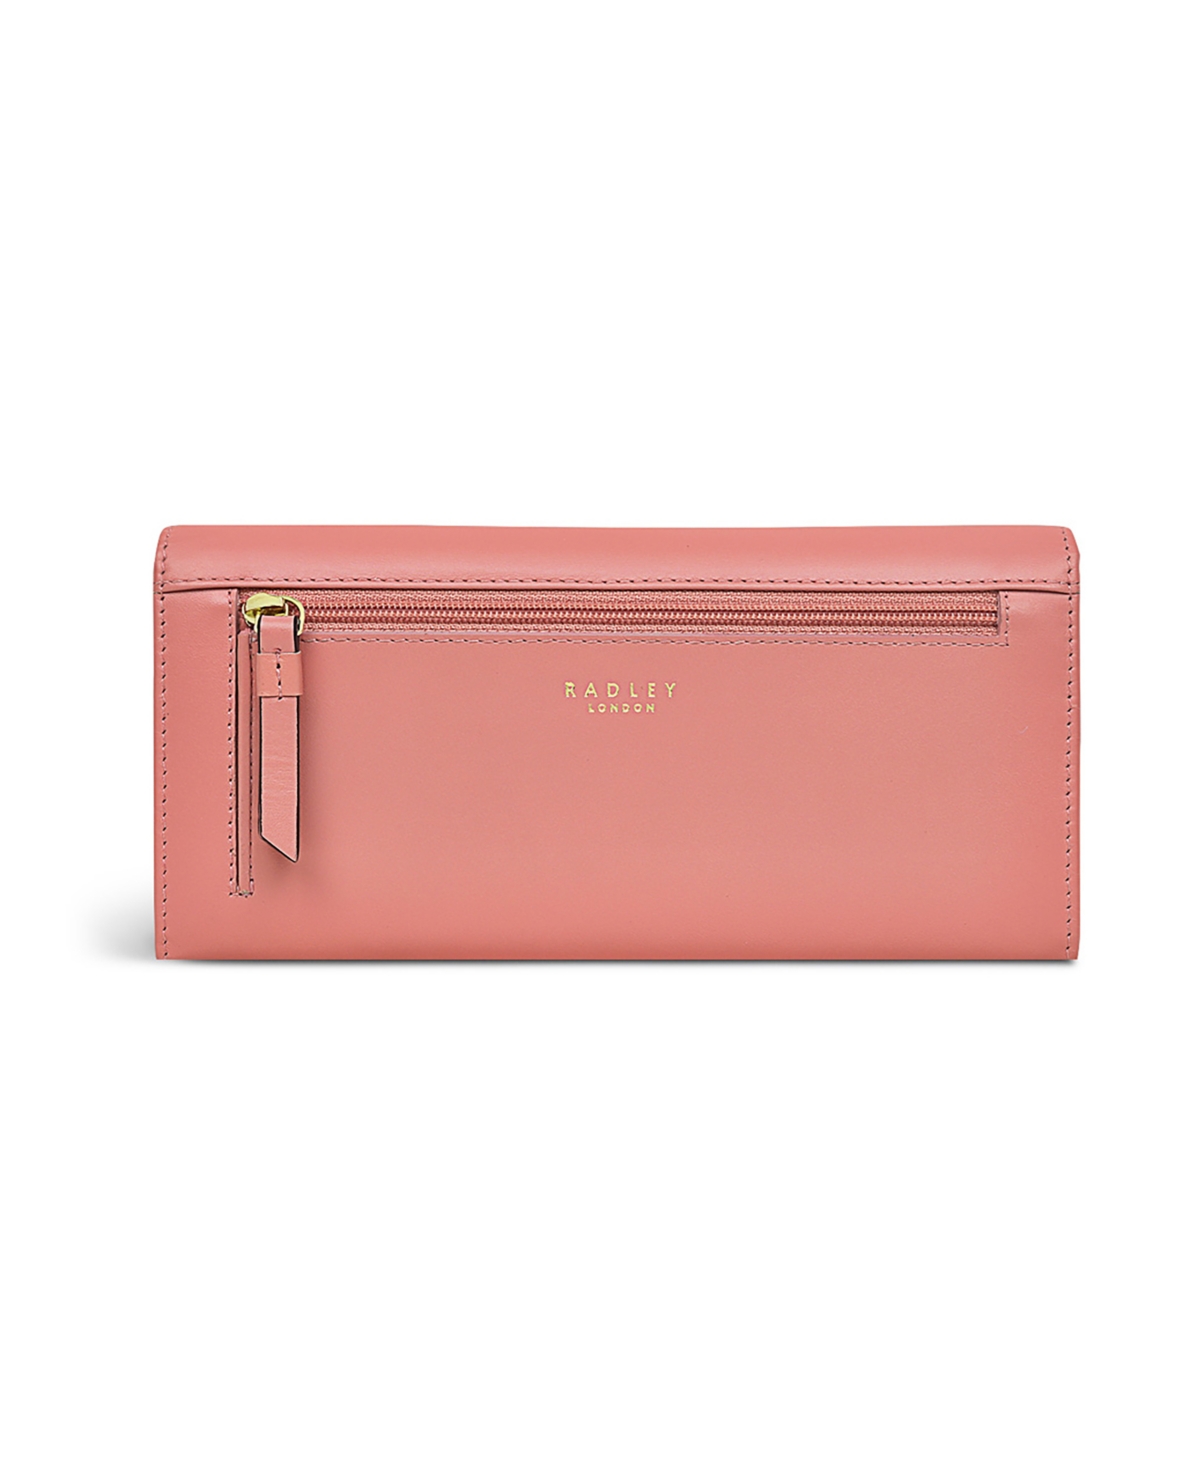 Shop Radley London Women's Heritage Radley Large Leather Flapover Wallet In Dove Grey,gold